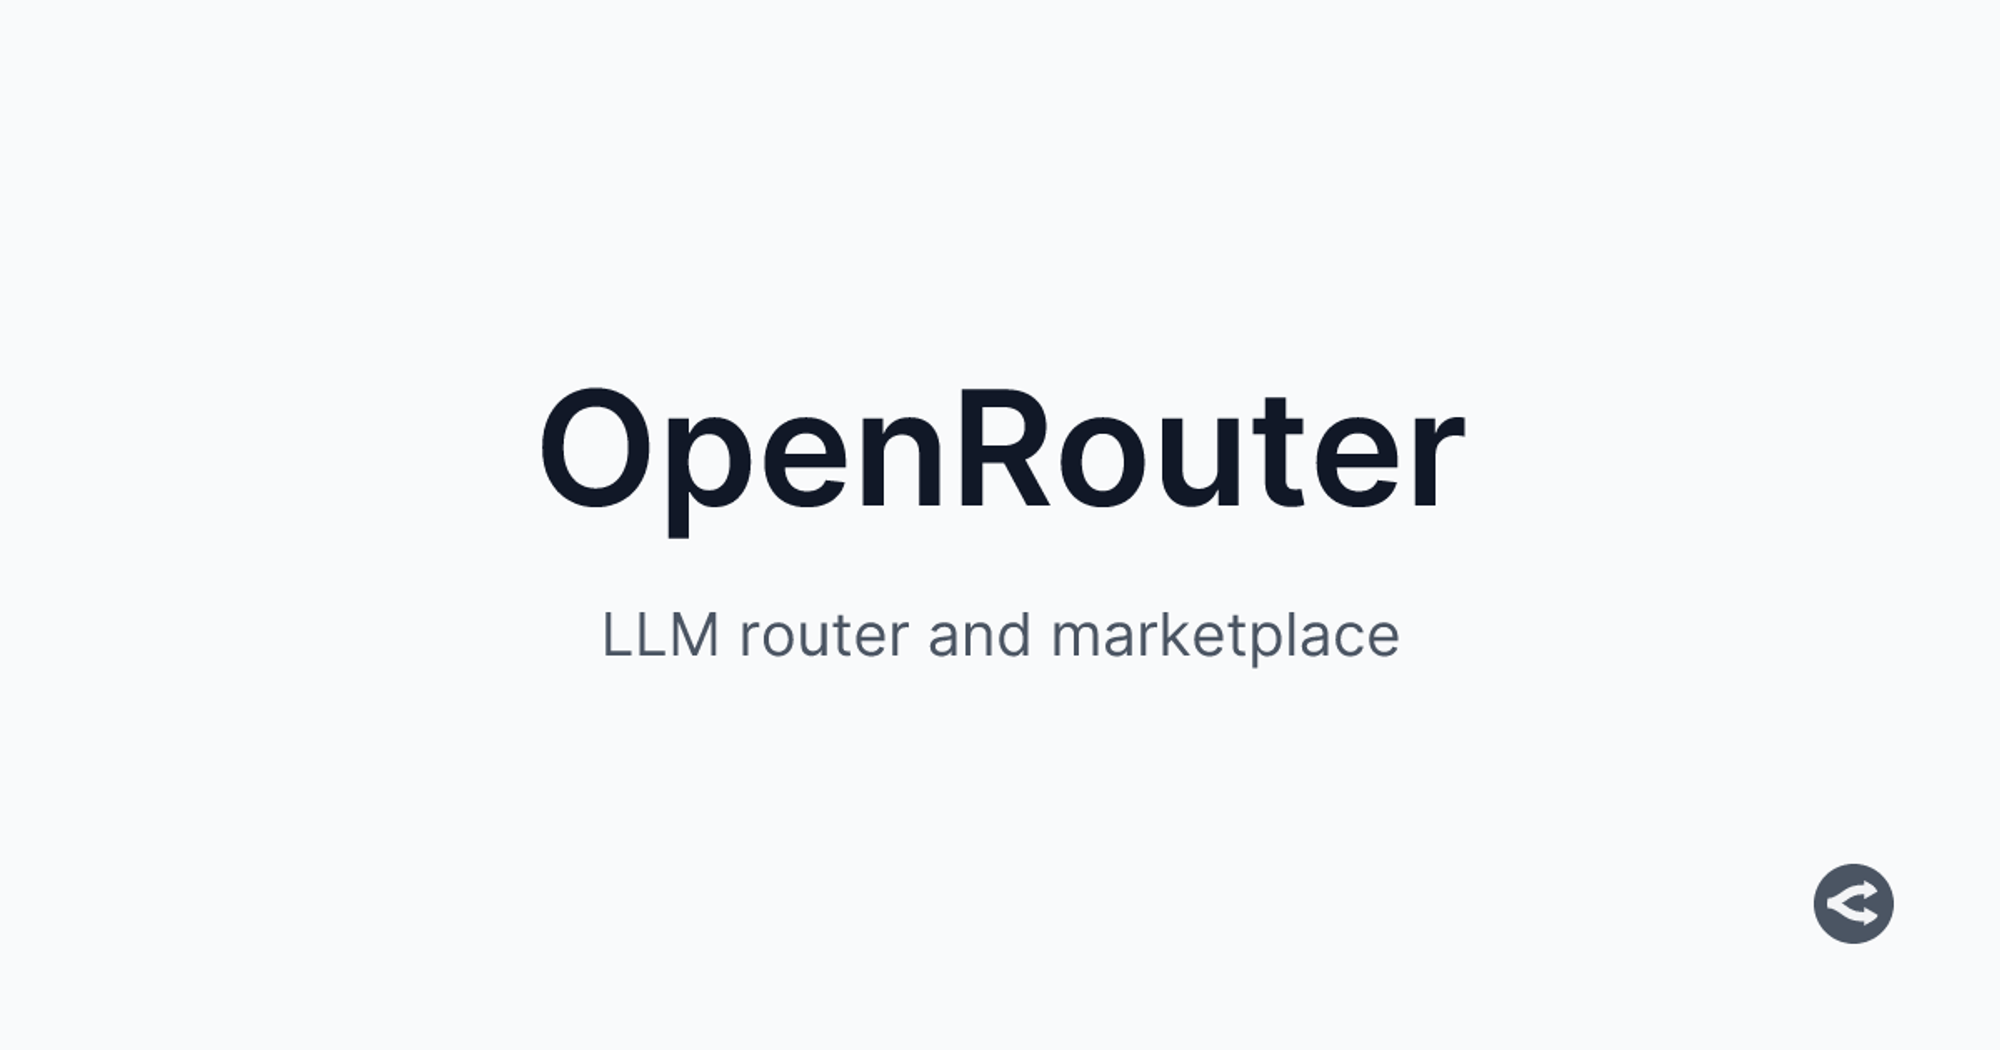 OpenRouter